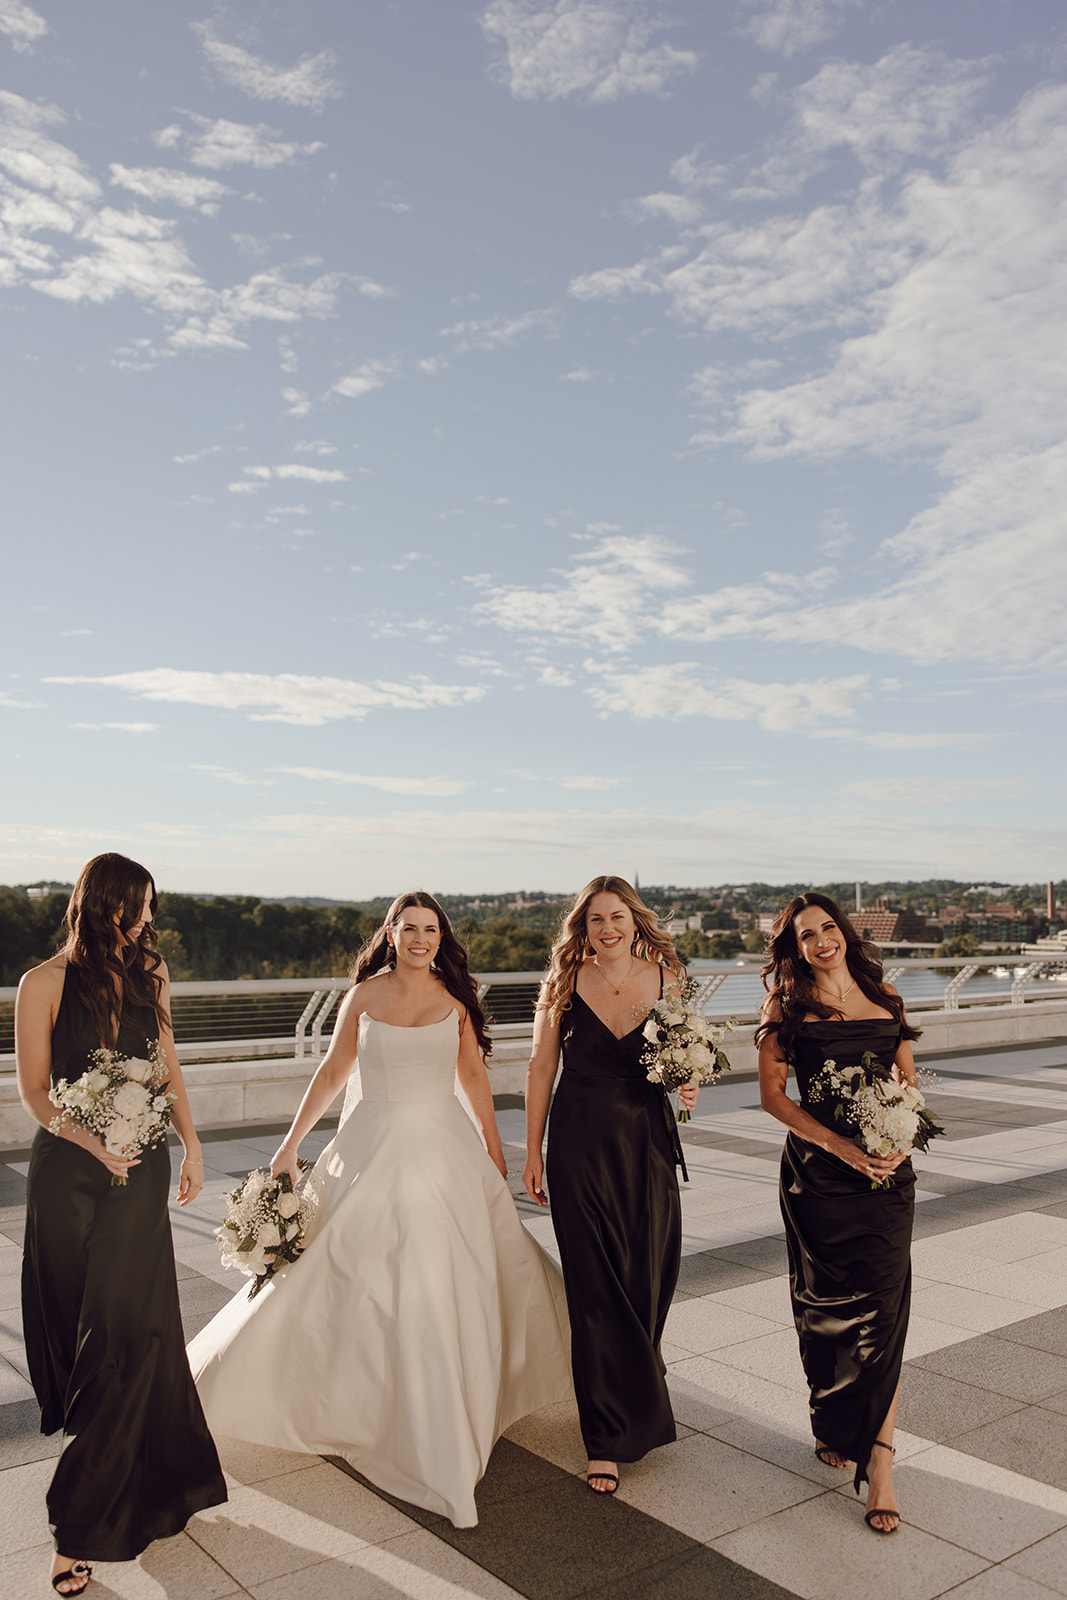 the bride walking with her bridesmaids captured by the wedding photographer in Washington DC